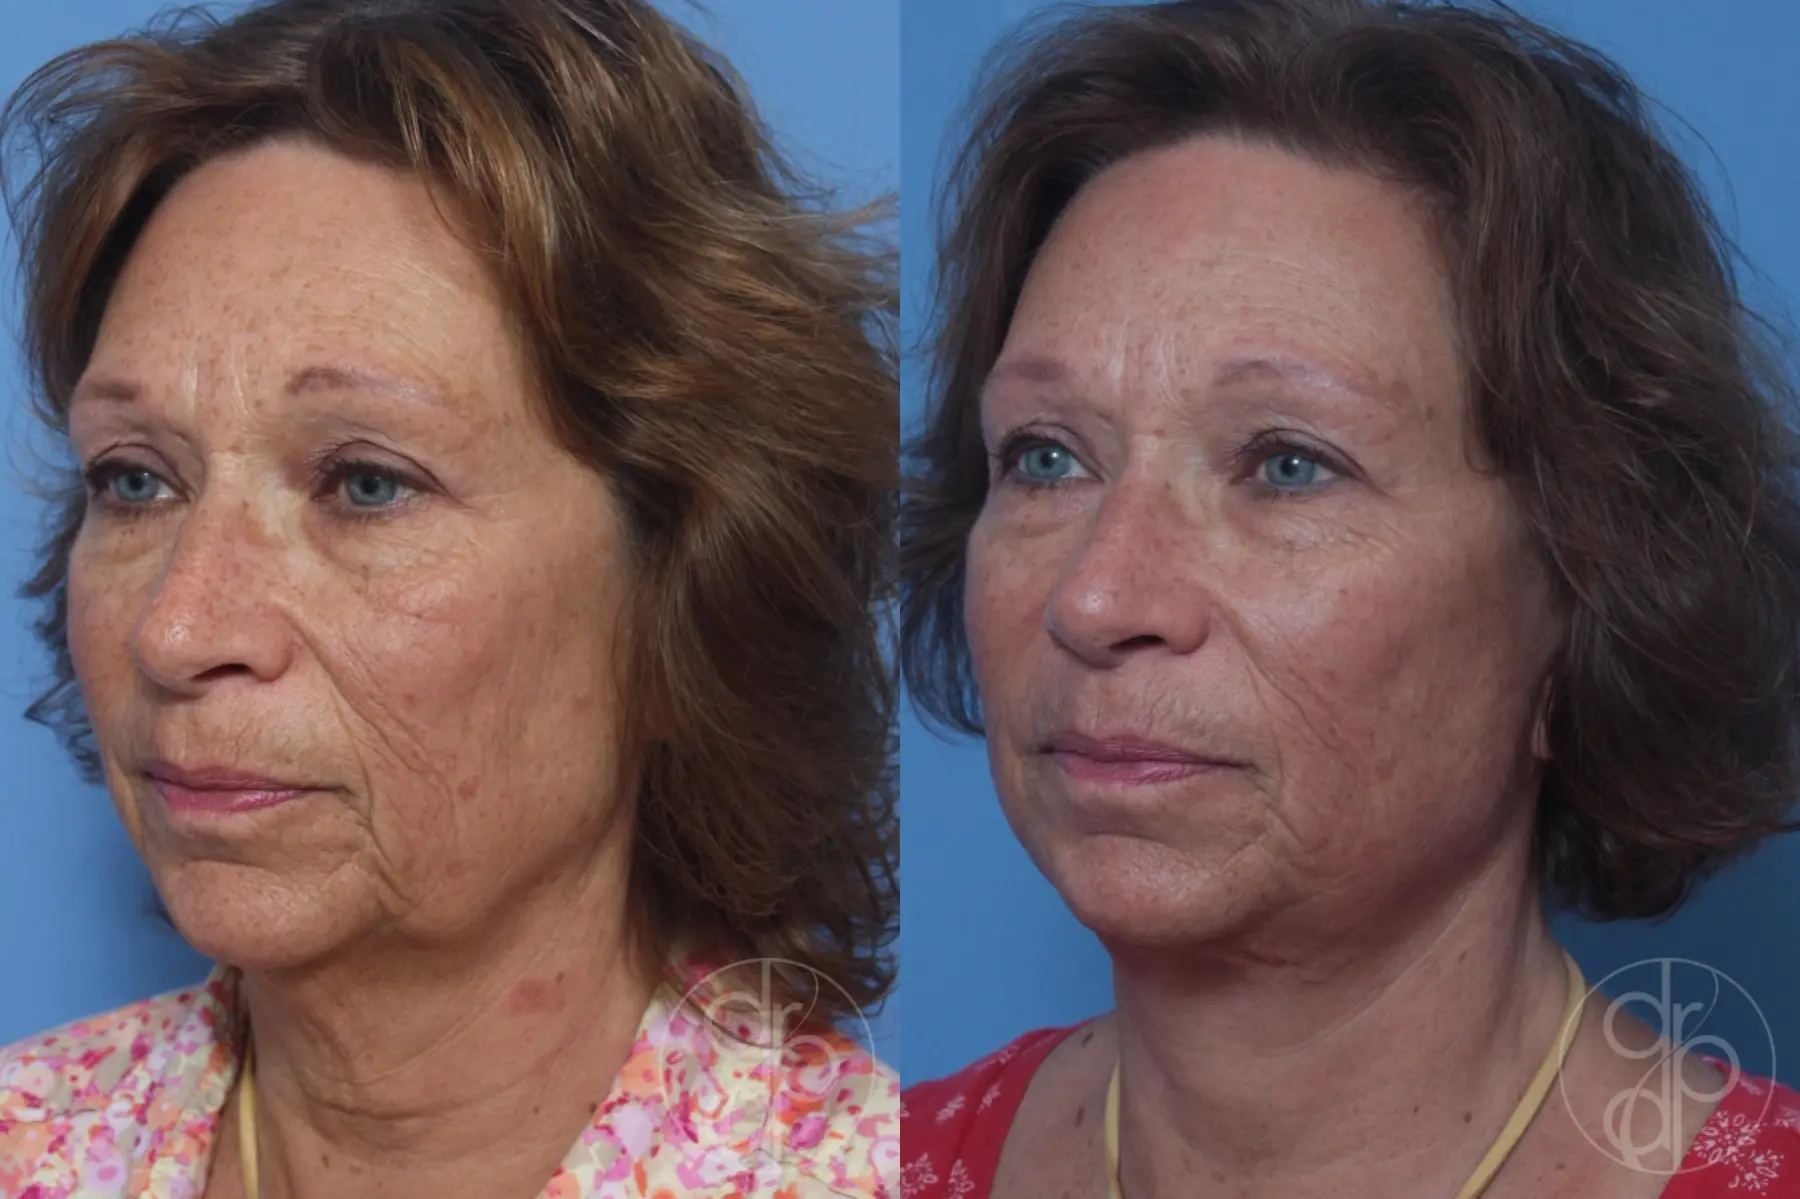 patient 10247 facelift before and after result - Before and After 2